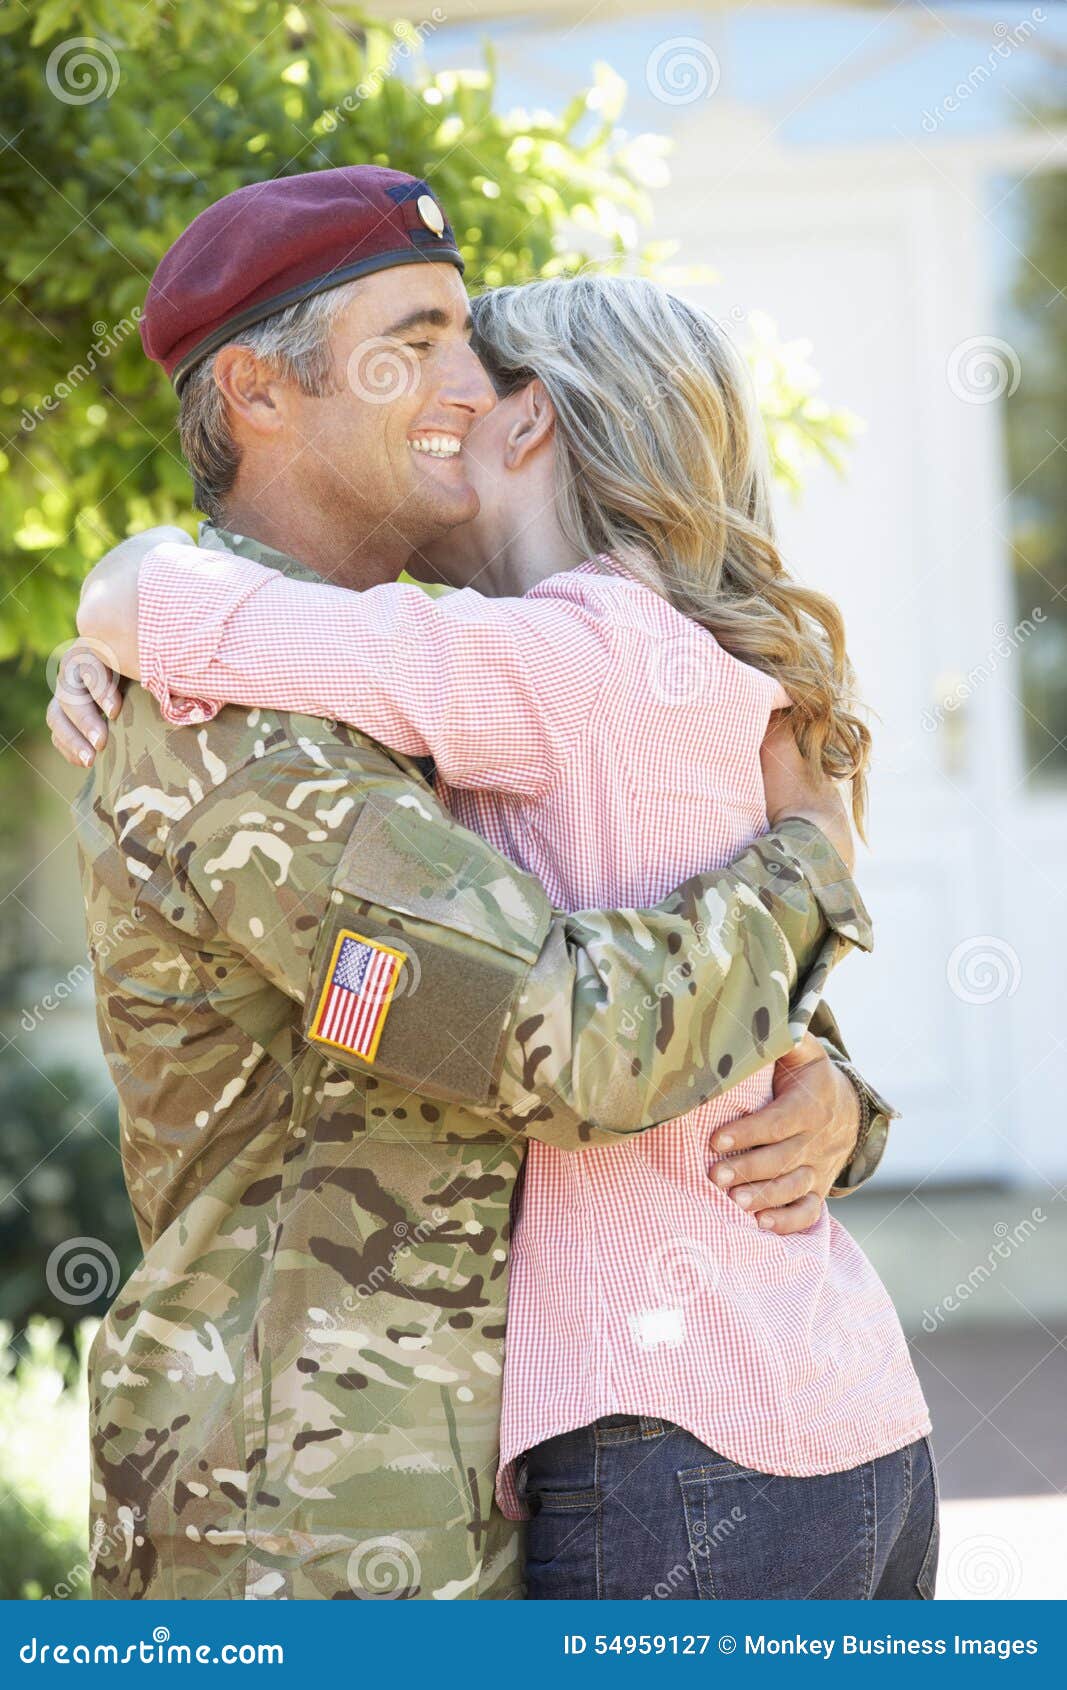 wifey welcoming home young soldier Xxx Pics Hd